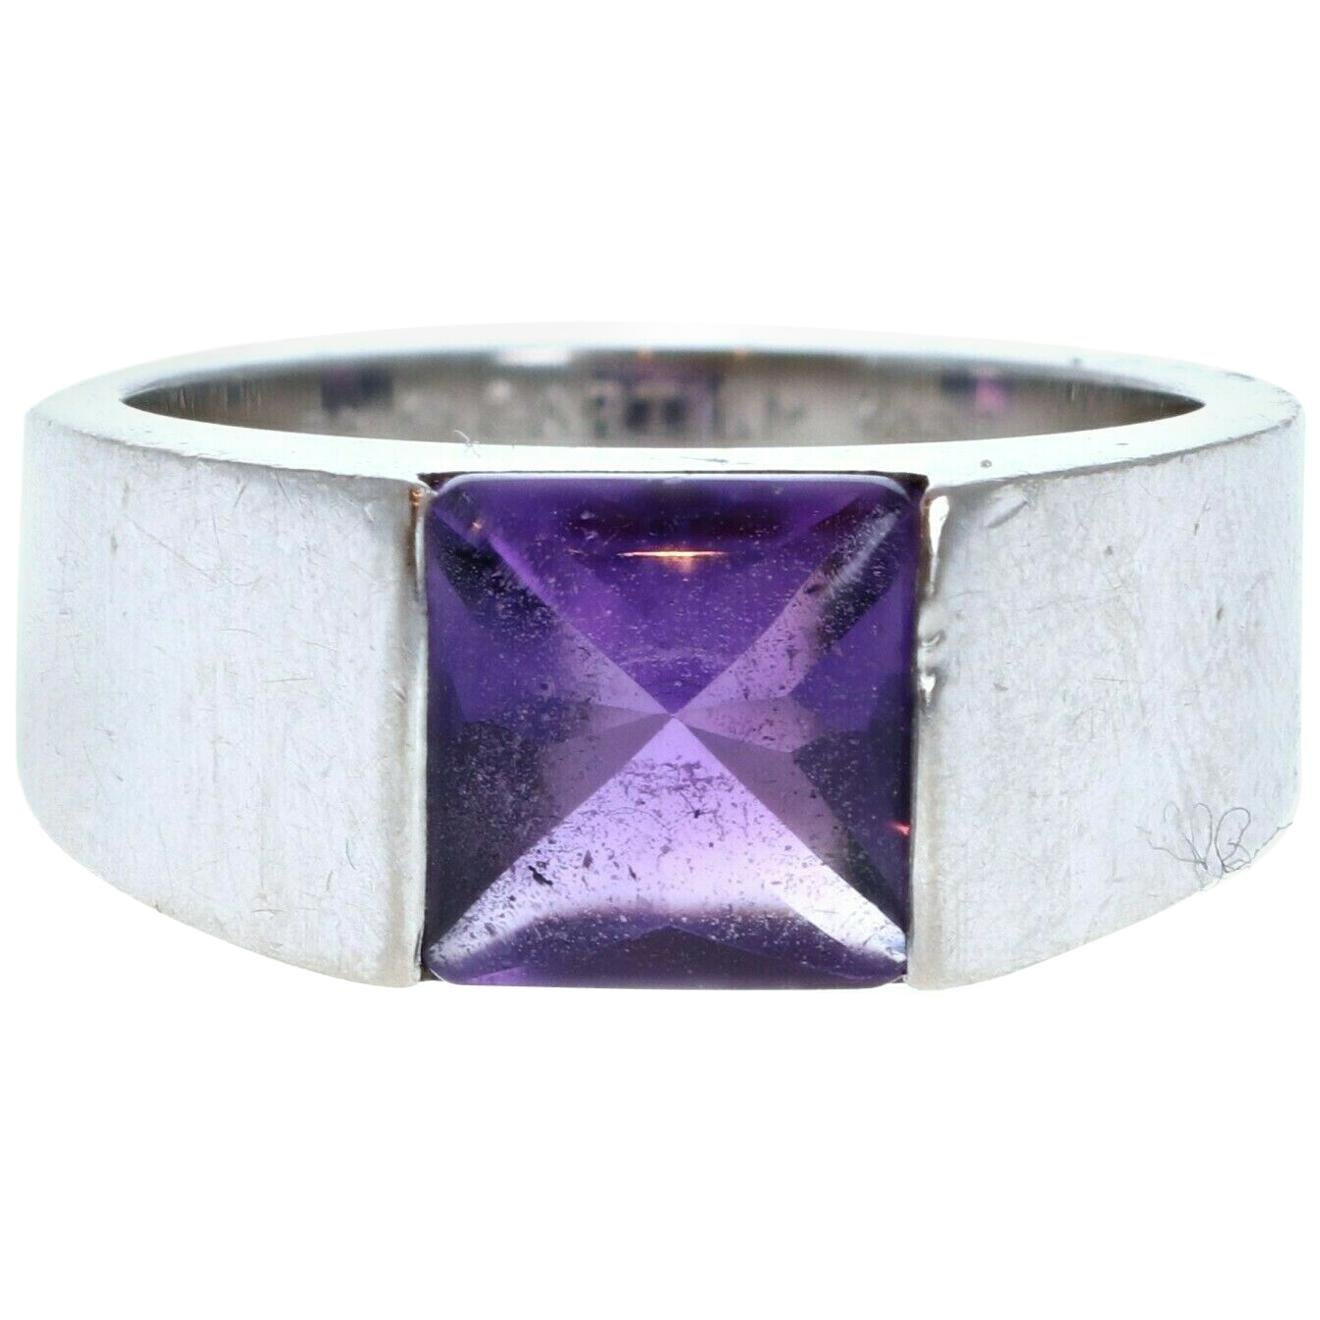 Large Authentic Cartier Tank 18k White Gold & Amethyst Wide Ring 13.4g